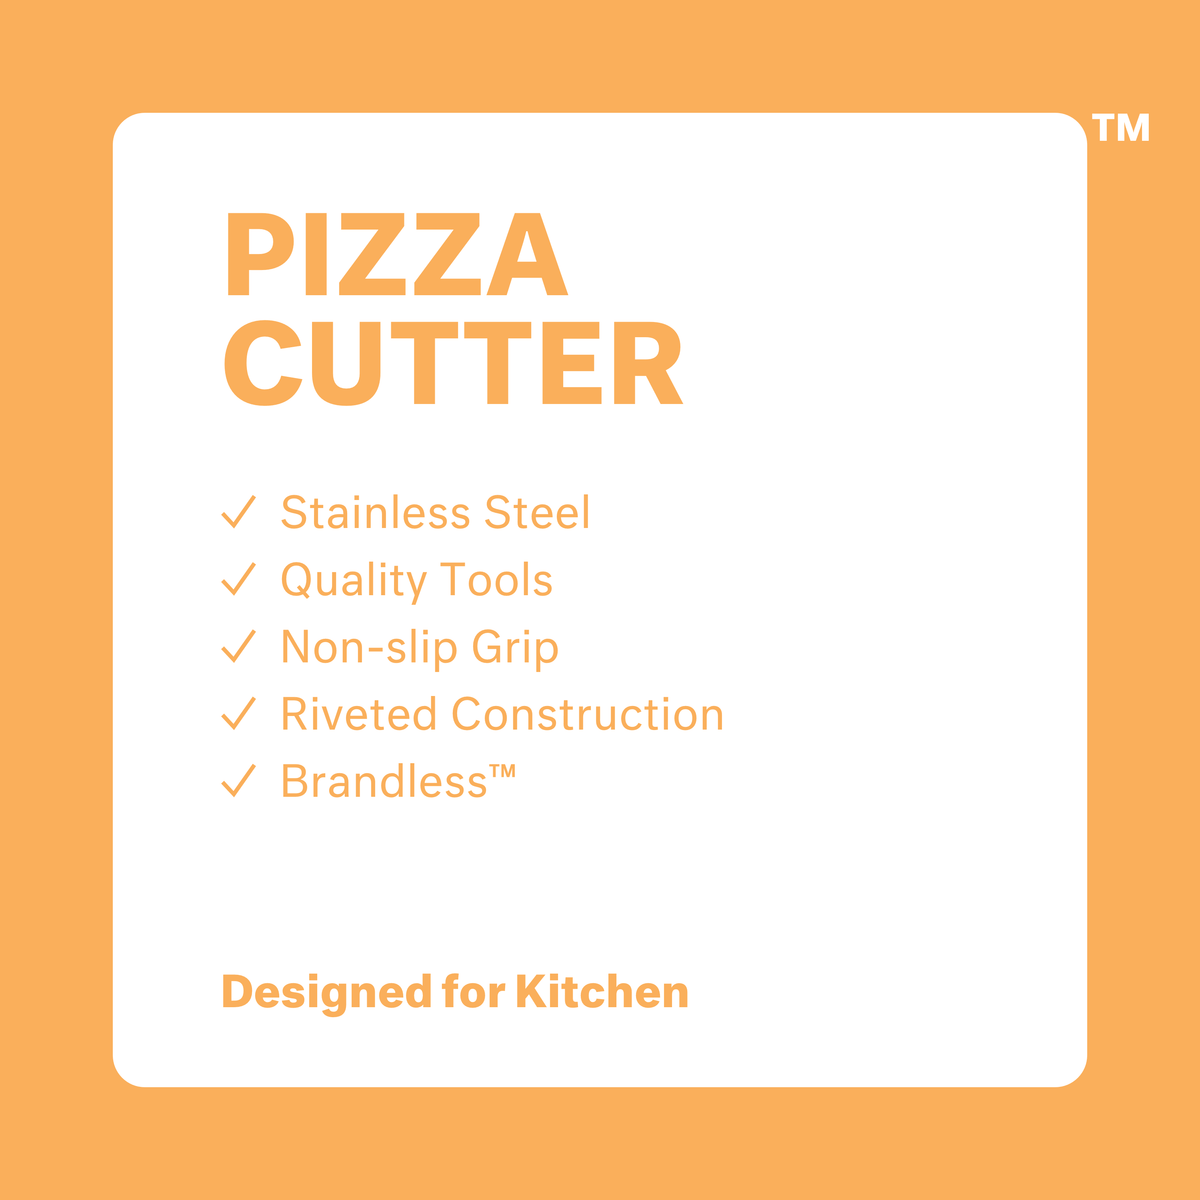 Pizza Cutter: stainless steel, quality tool, non-slip grip, riveted construction, brandless. Designed for kitchen.